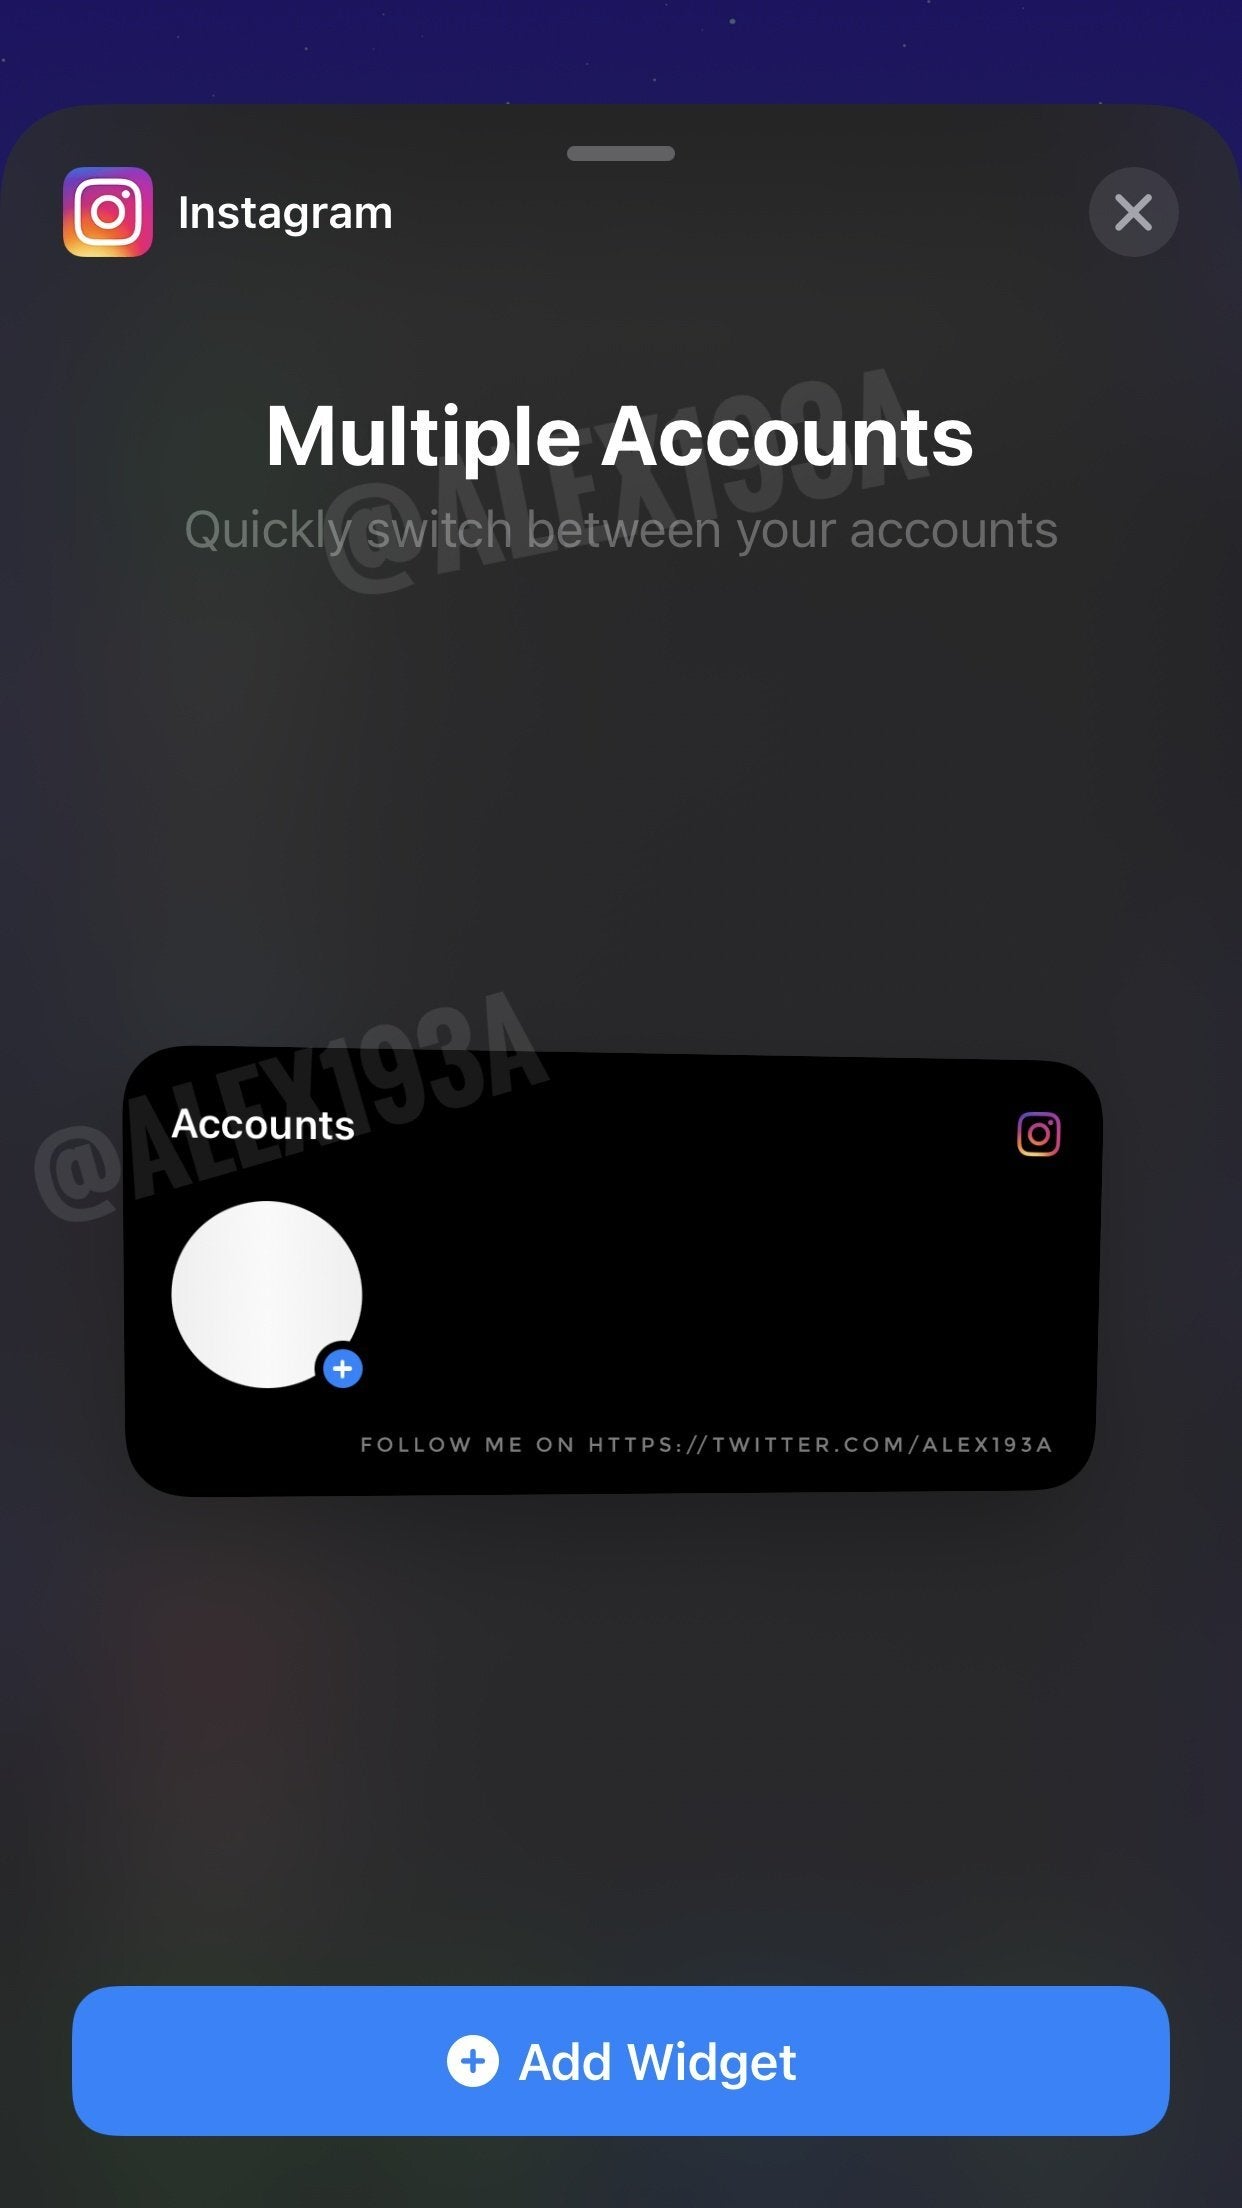 Instagram is working on an iOS home-screen widget for easy account switching